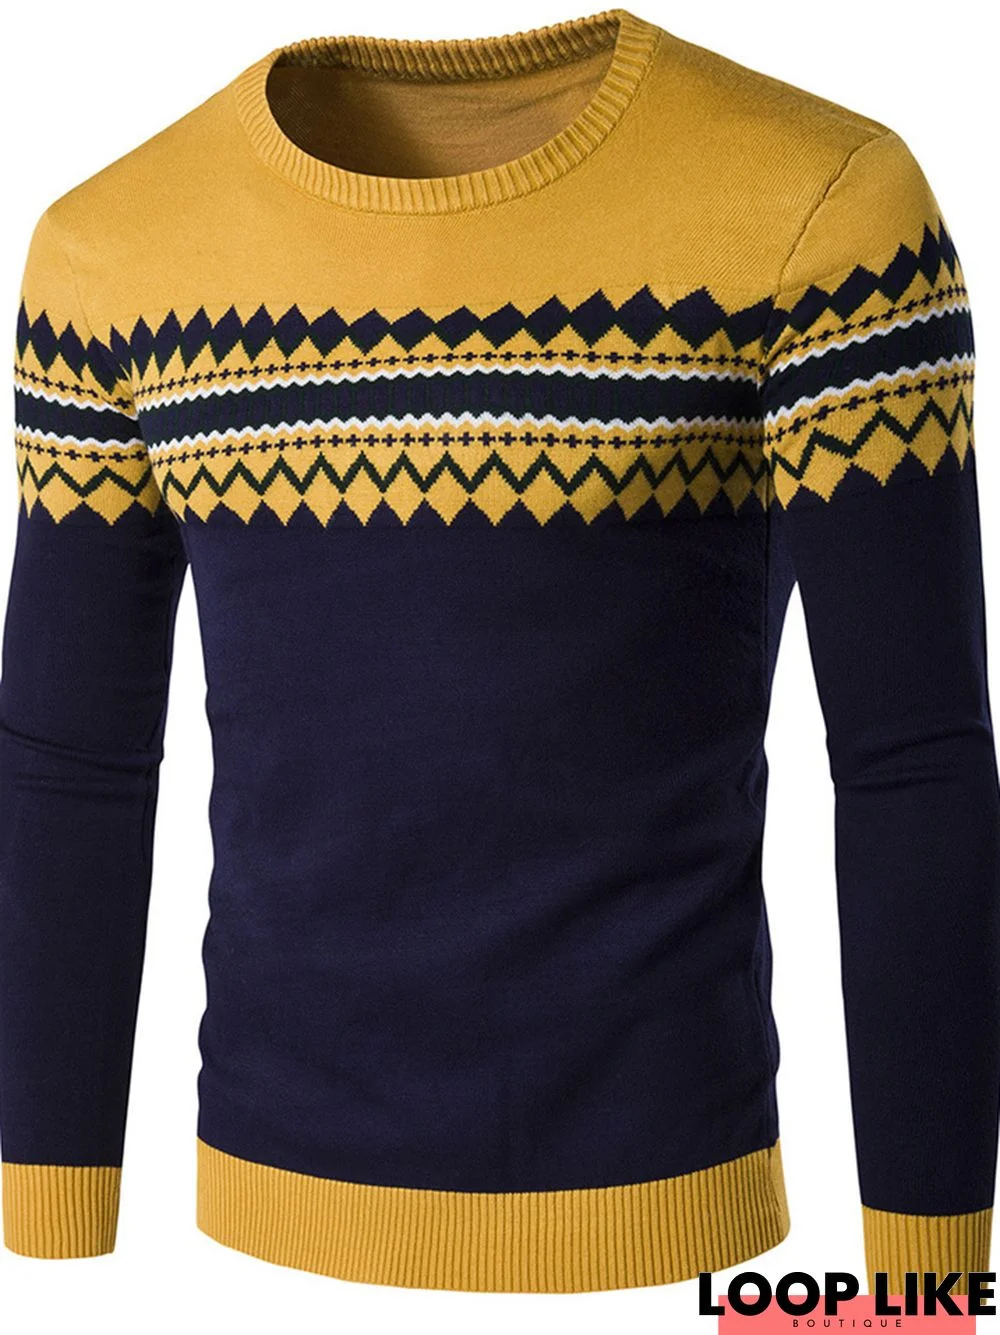 Men's Round Neck Color Matching Knitted Wool Sweater